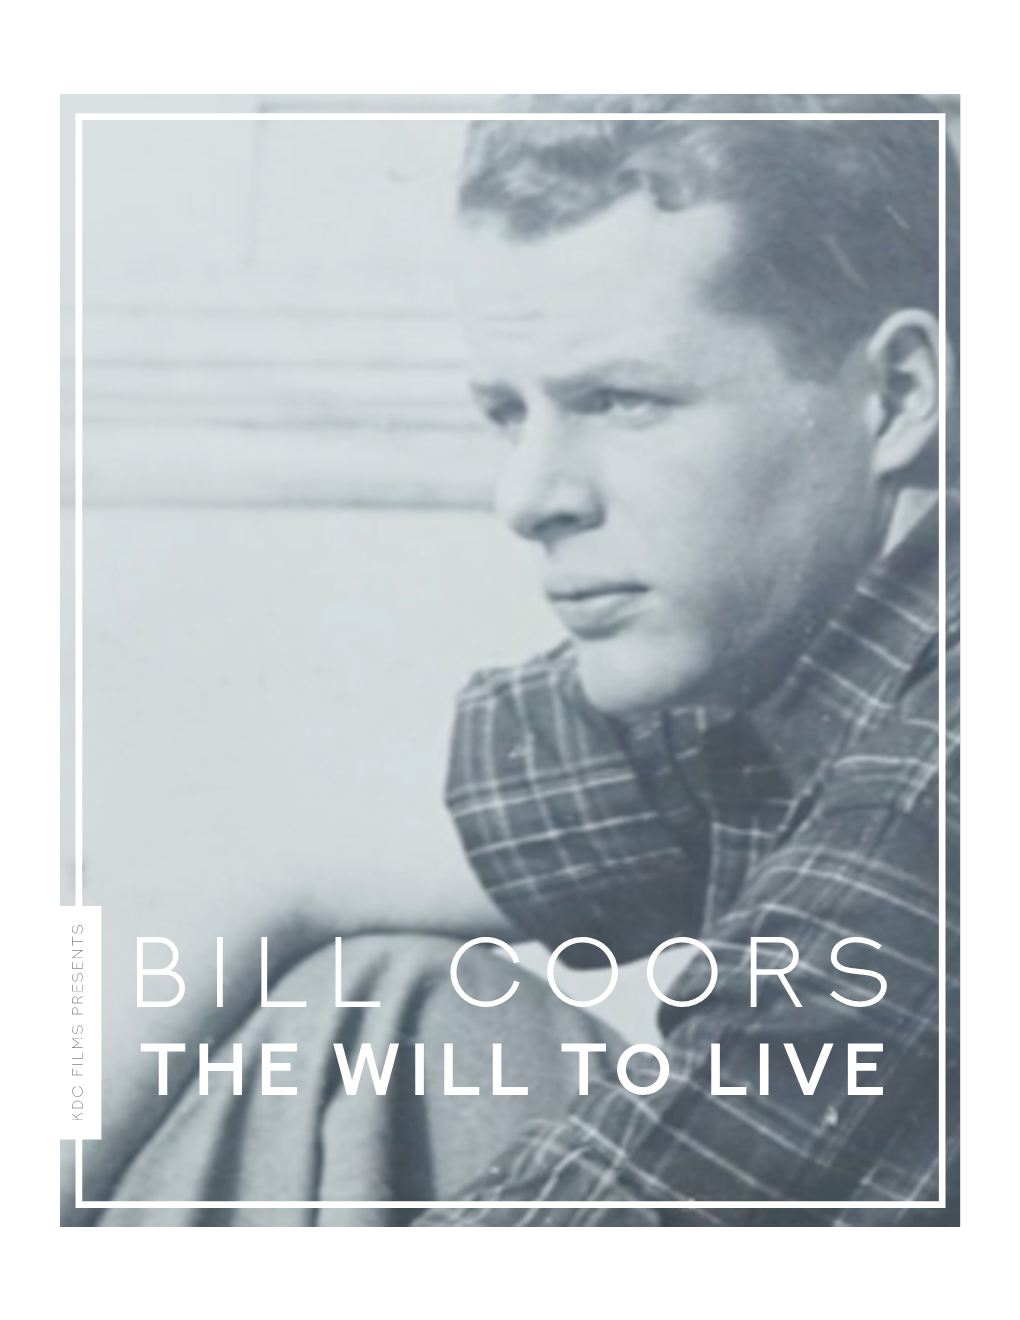 Bill Coors: the Will to Live